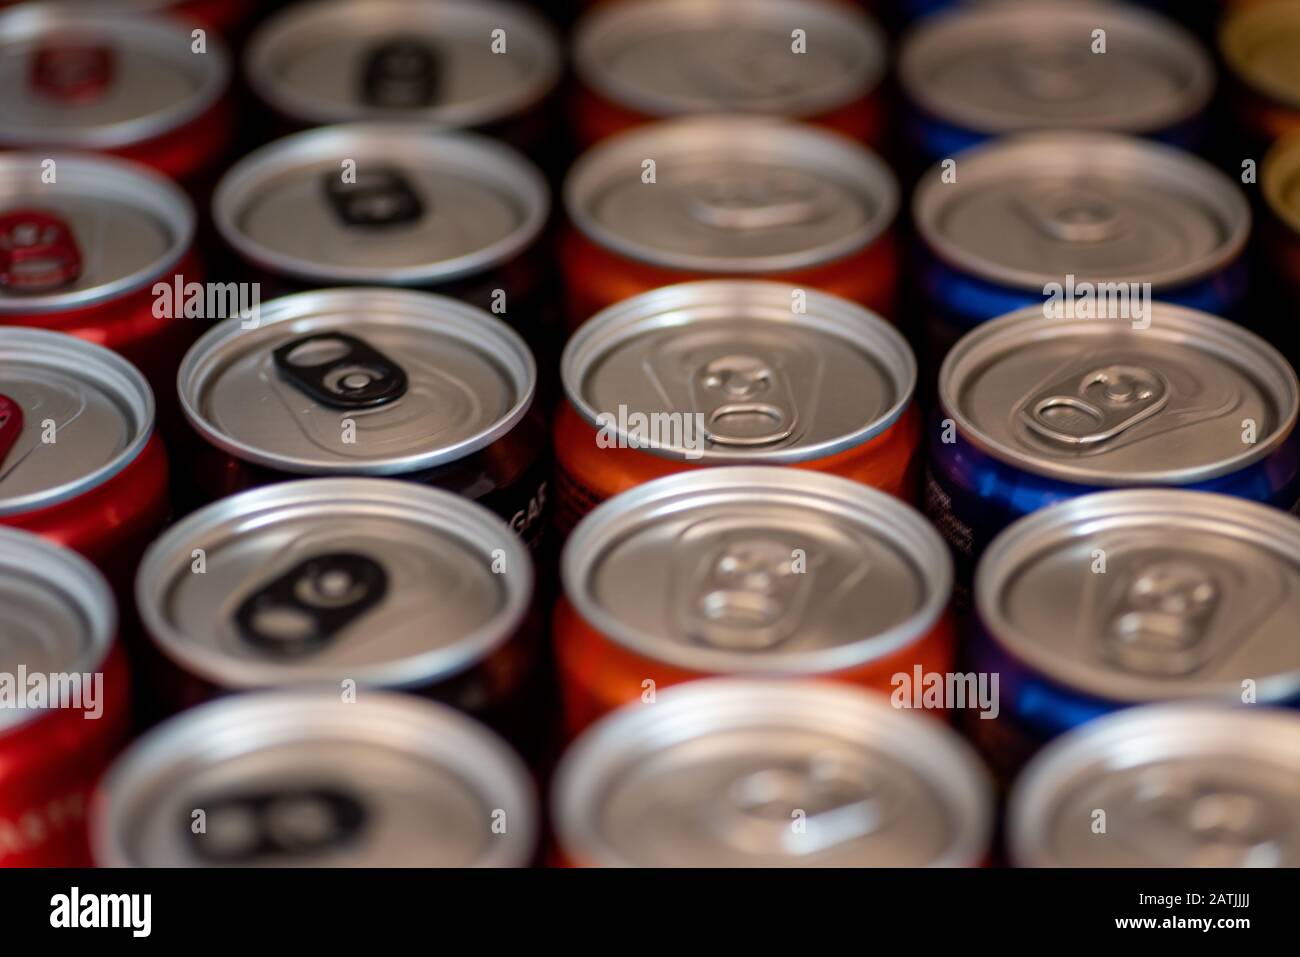 Softdrink cans shot closely together Stock Photo